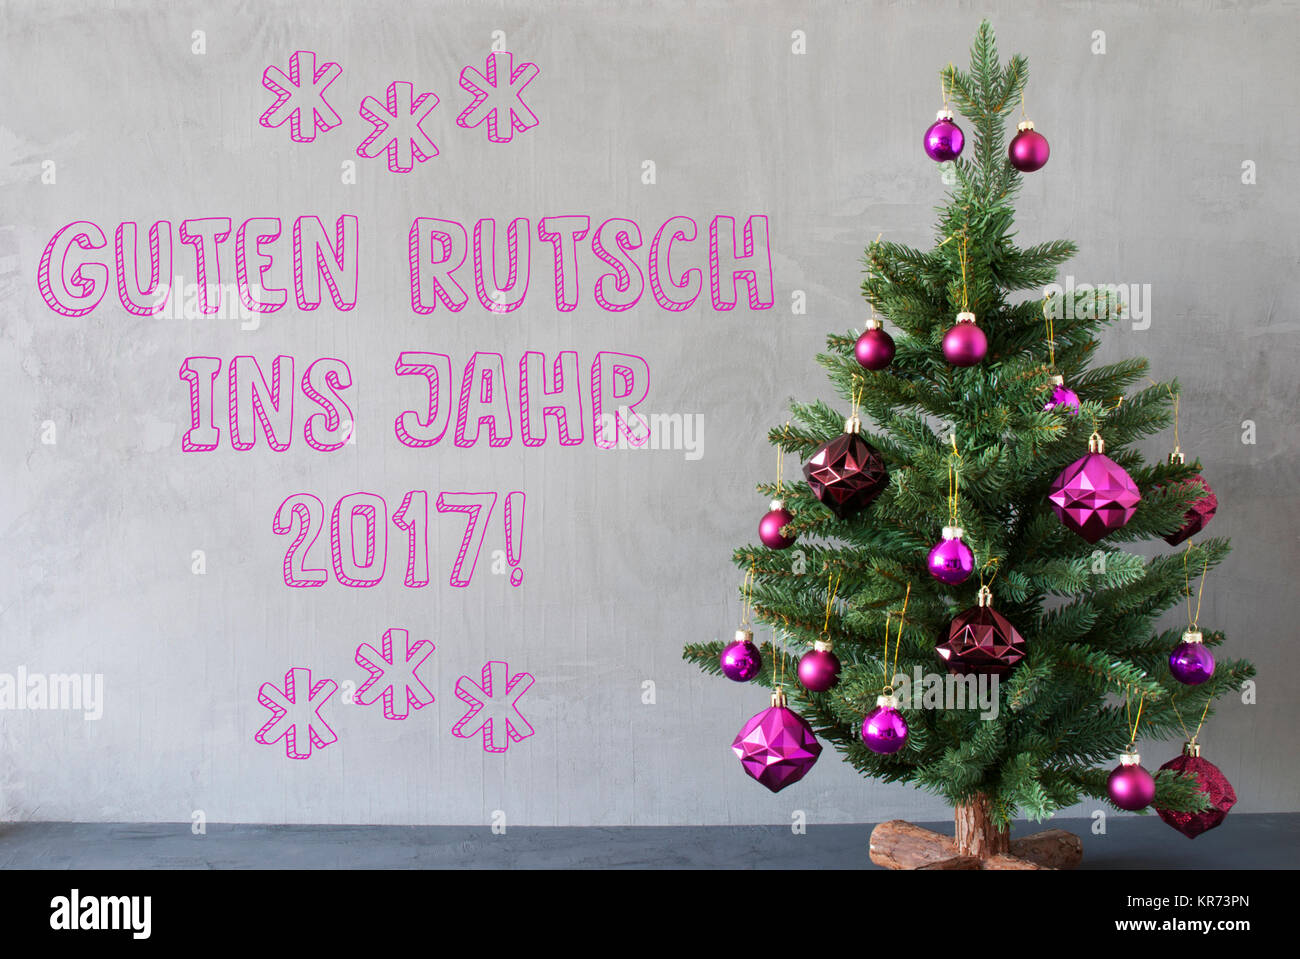 Christmas Tree With Purple Christmas Tree Balls. Card For Seasons Greetings. Gray Cement Or Concrete Wall For Urban, Modern Industrial Styl. German Text Guten Rutsch Ins Jahr 2017 Means Happy New Year Stock Photo